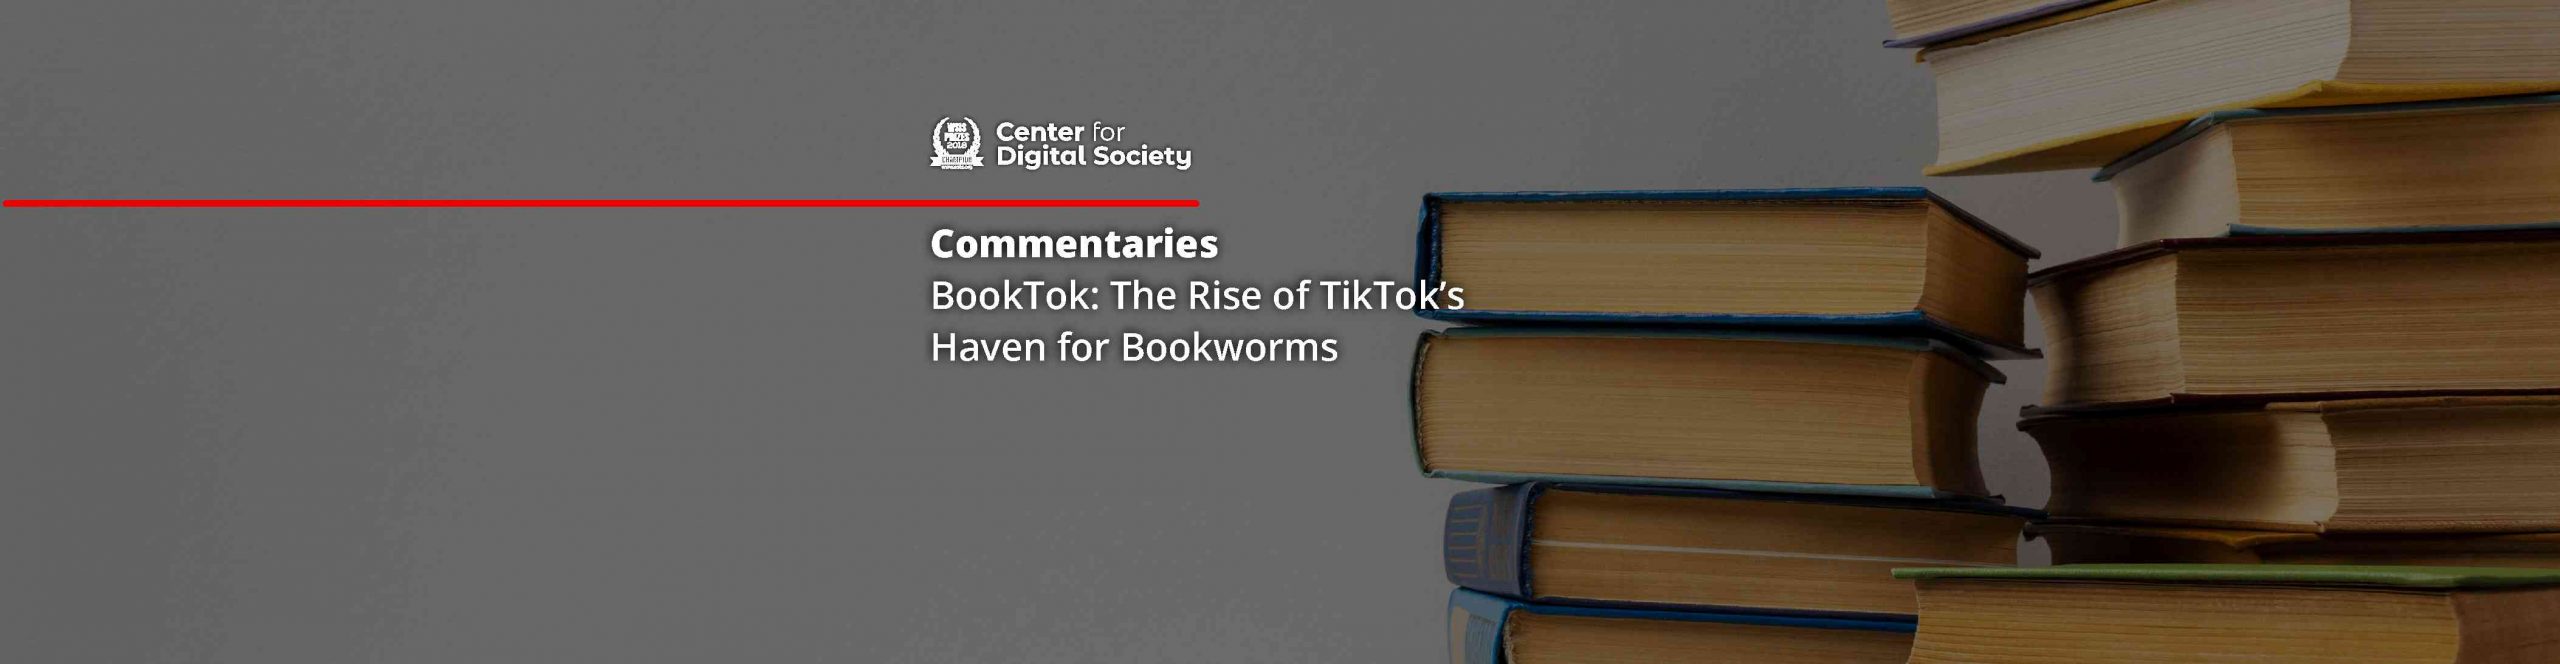 BookTok: The Rise of TikTok’s Haven for Bookworms